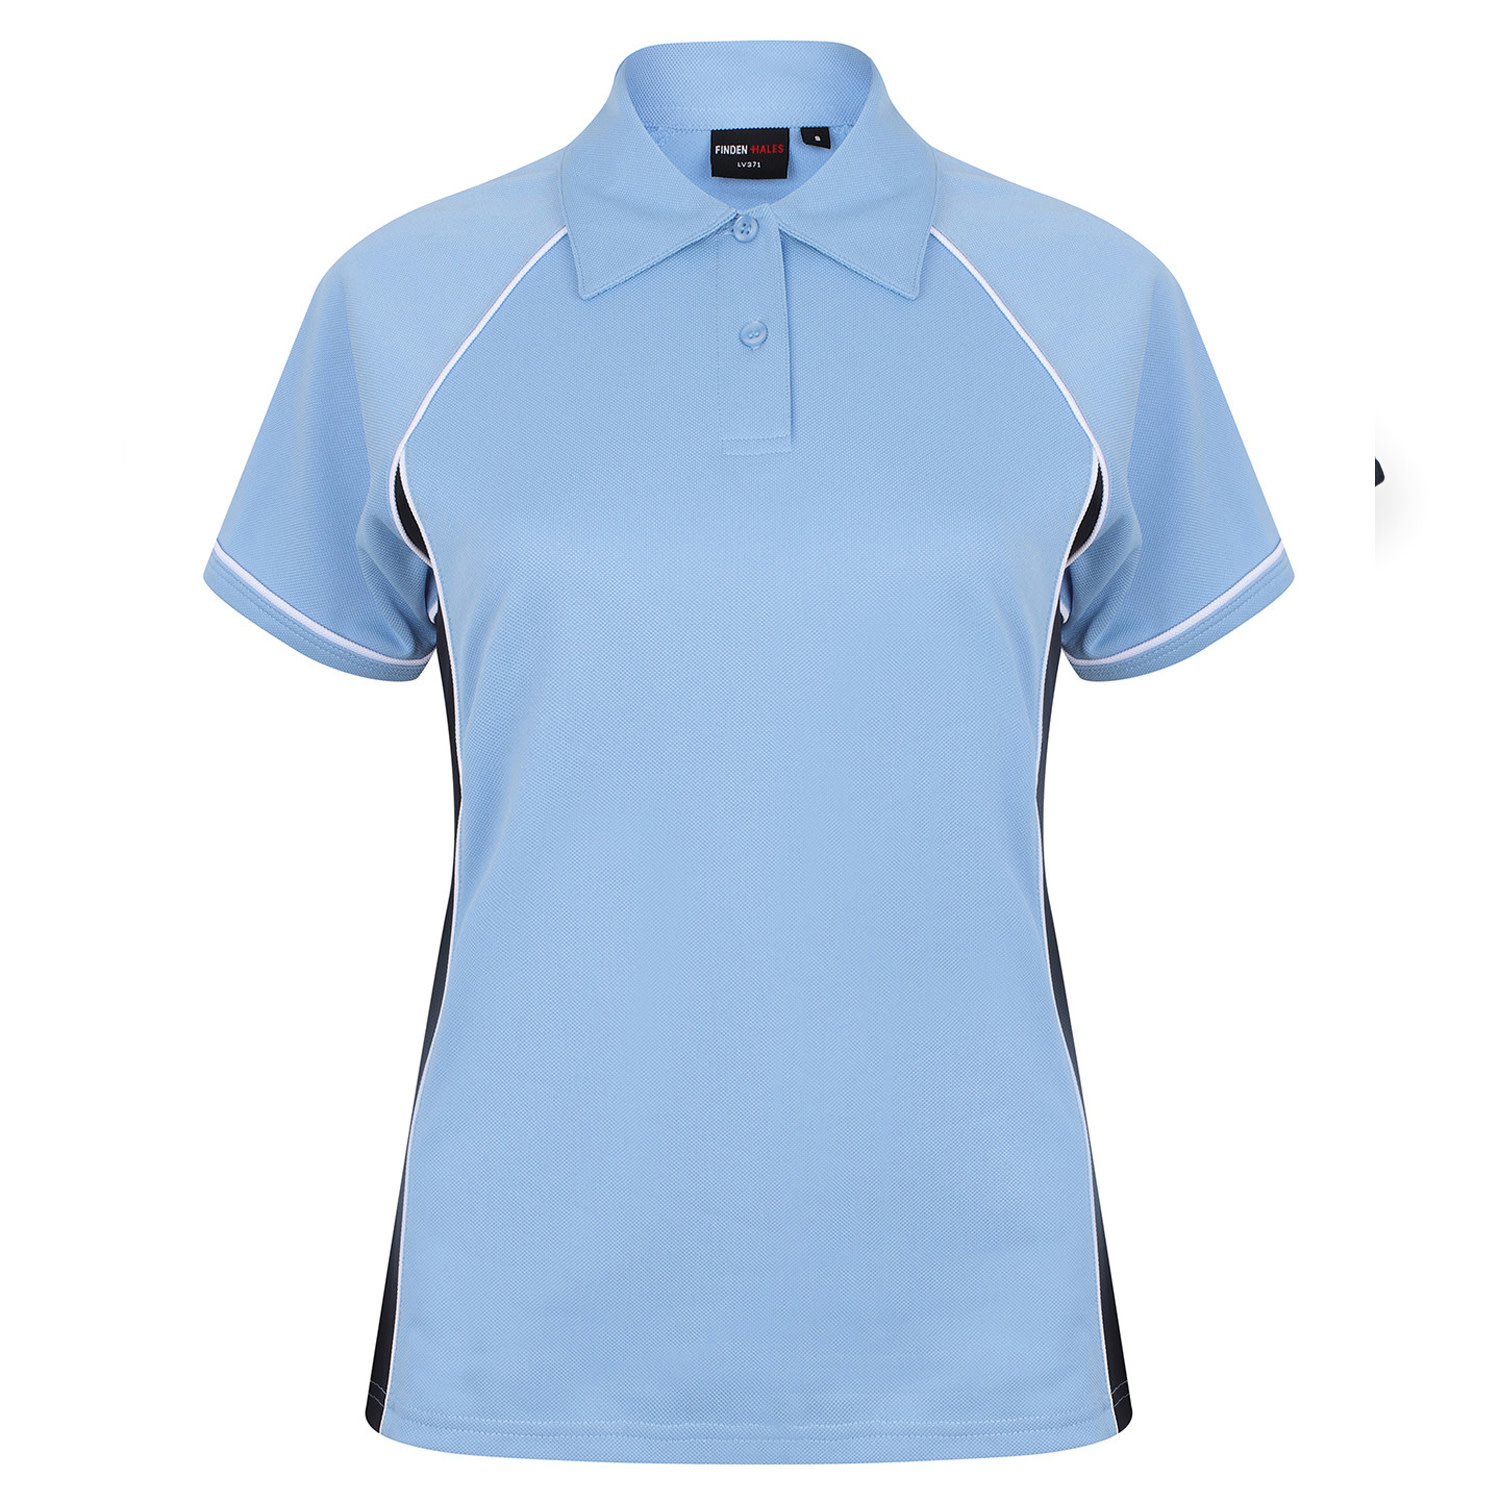 Ladies Piped Performance Polo